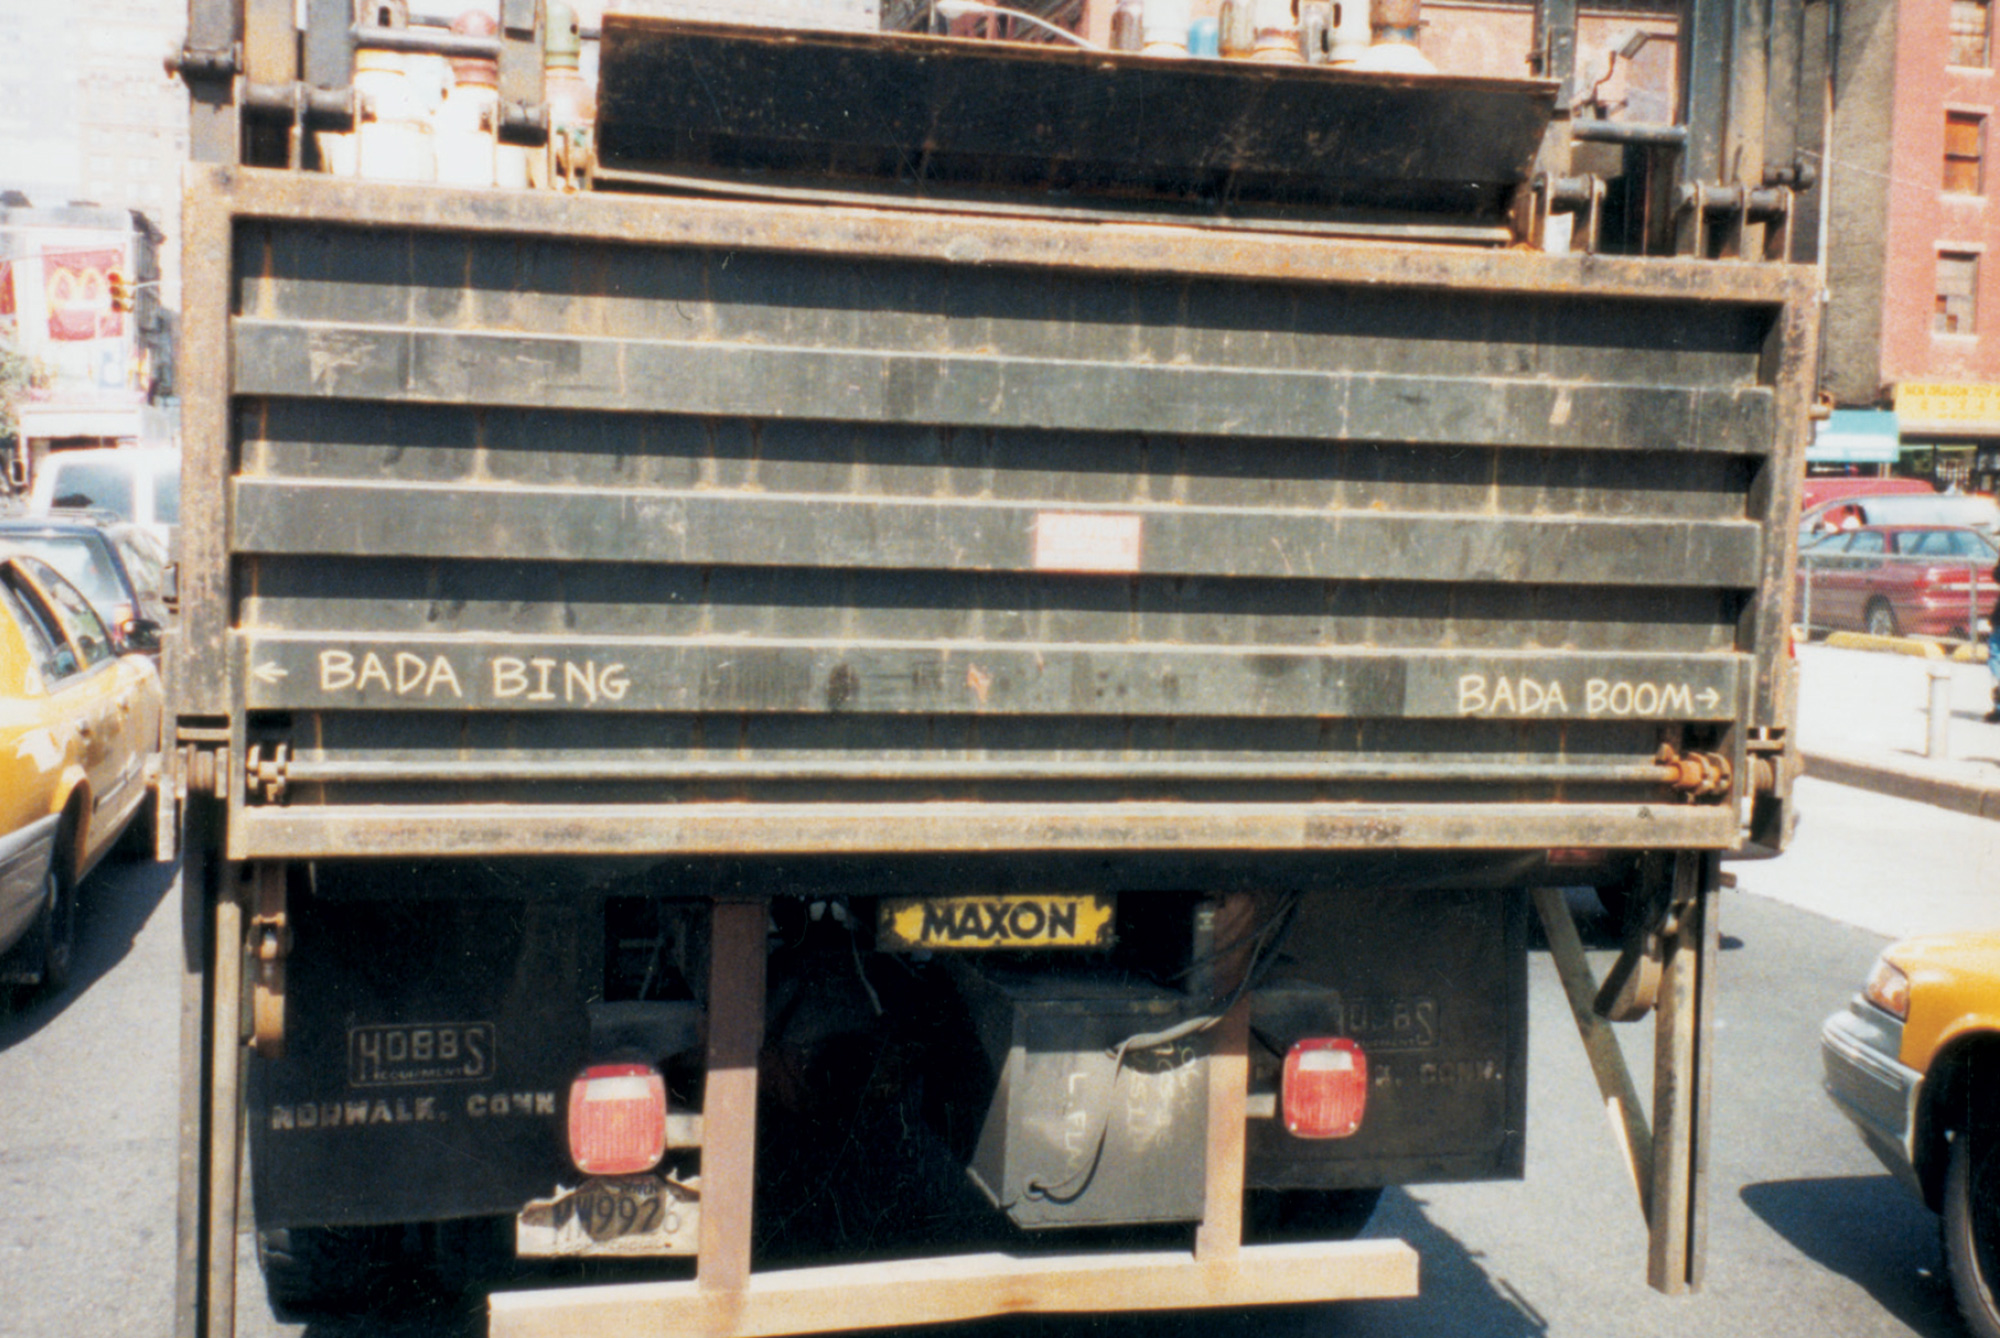 A photo by Joseph Fratesi of the back of a truck with the words 